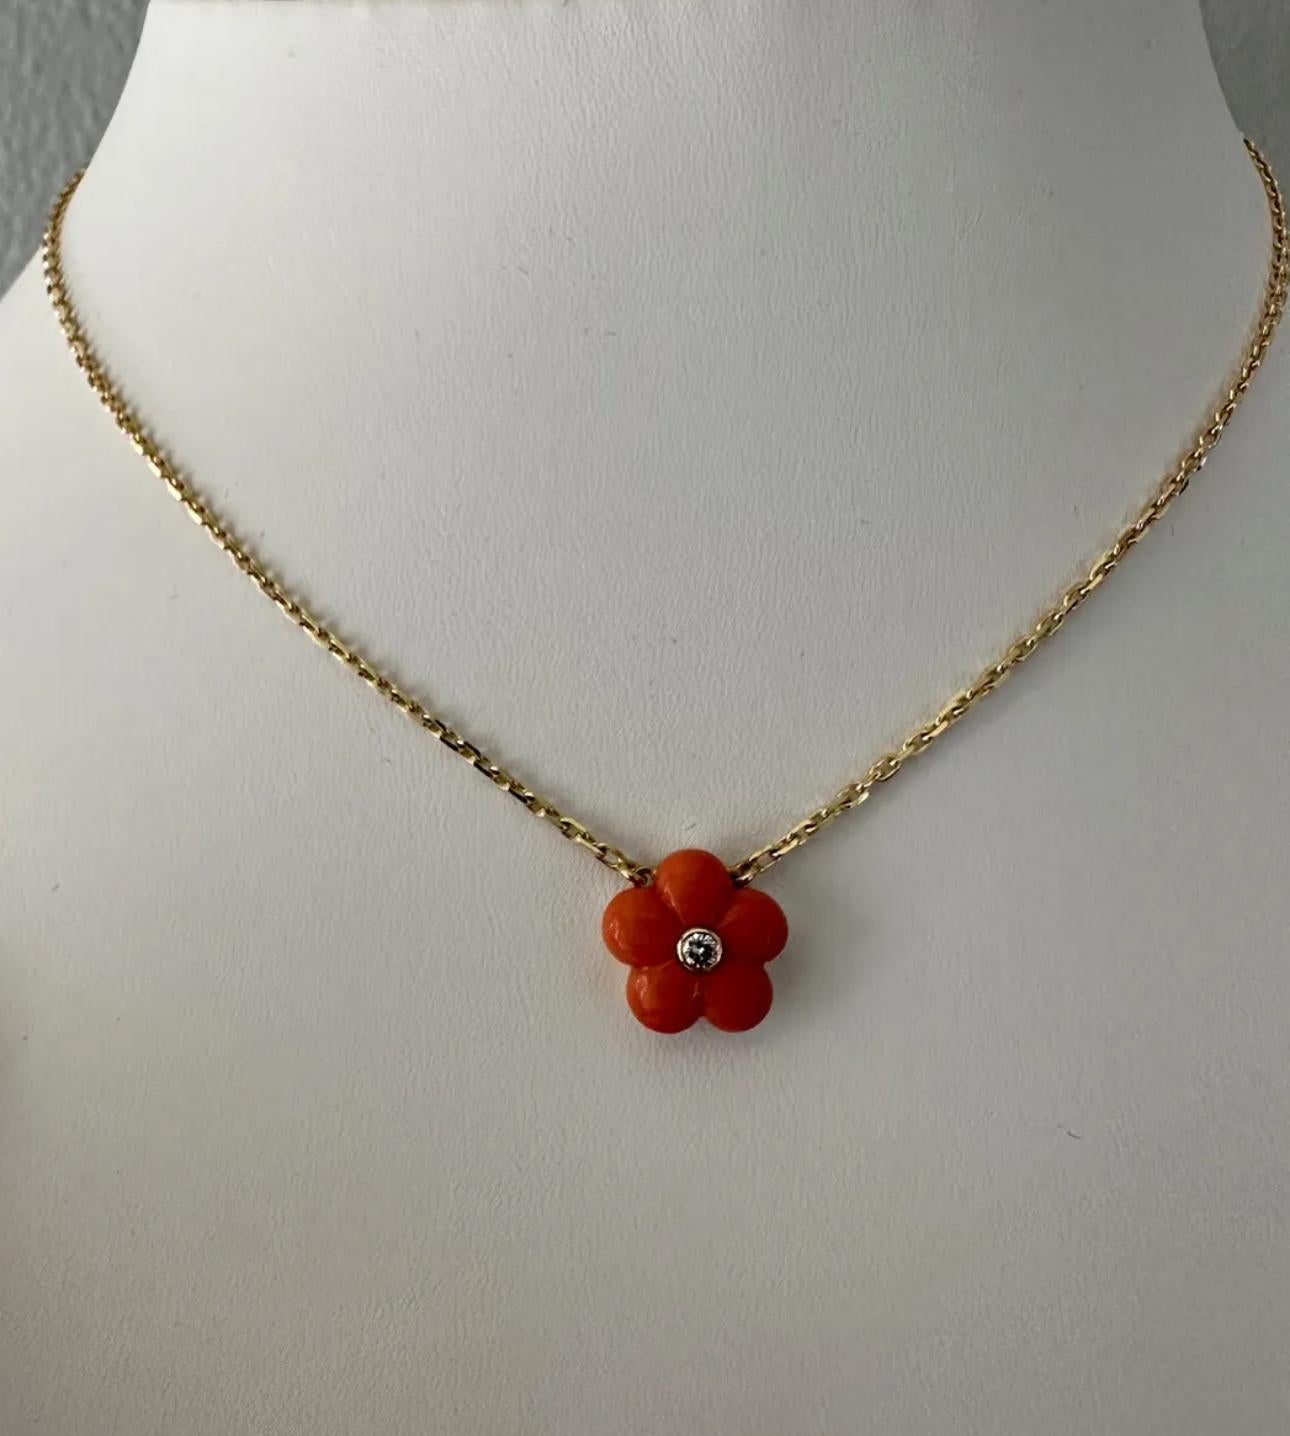 Van Cleef & Arpels pendant necklace features a stunning coral flower design with a diamond accent. The pendant is set in 18k yellow gold It is signed by the VCA and is a Flower style pendant. The main stone being coral and the secondary stone being